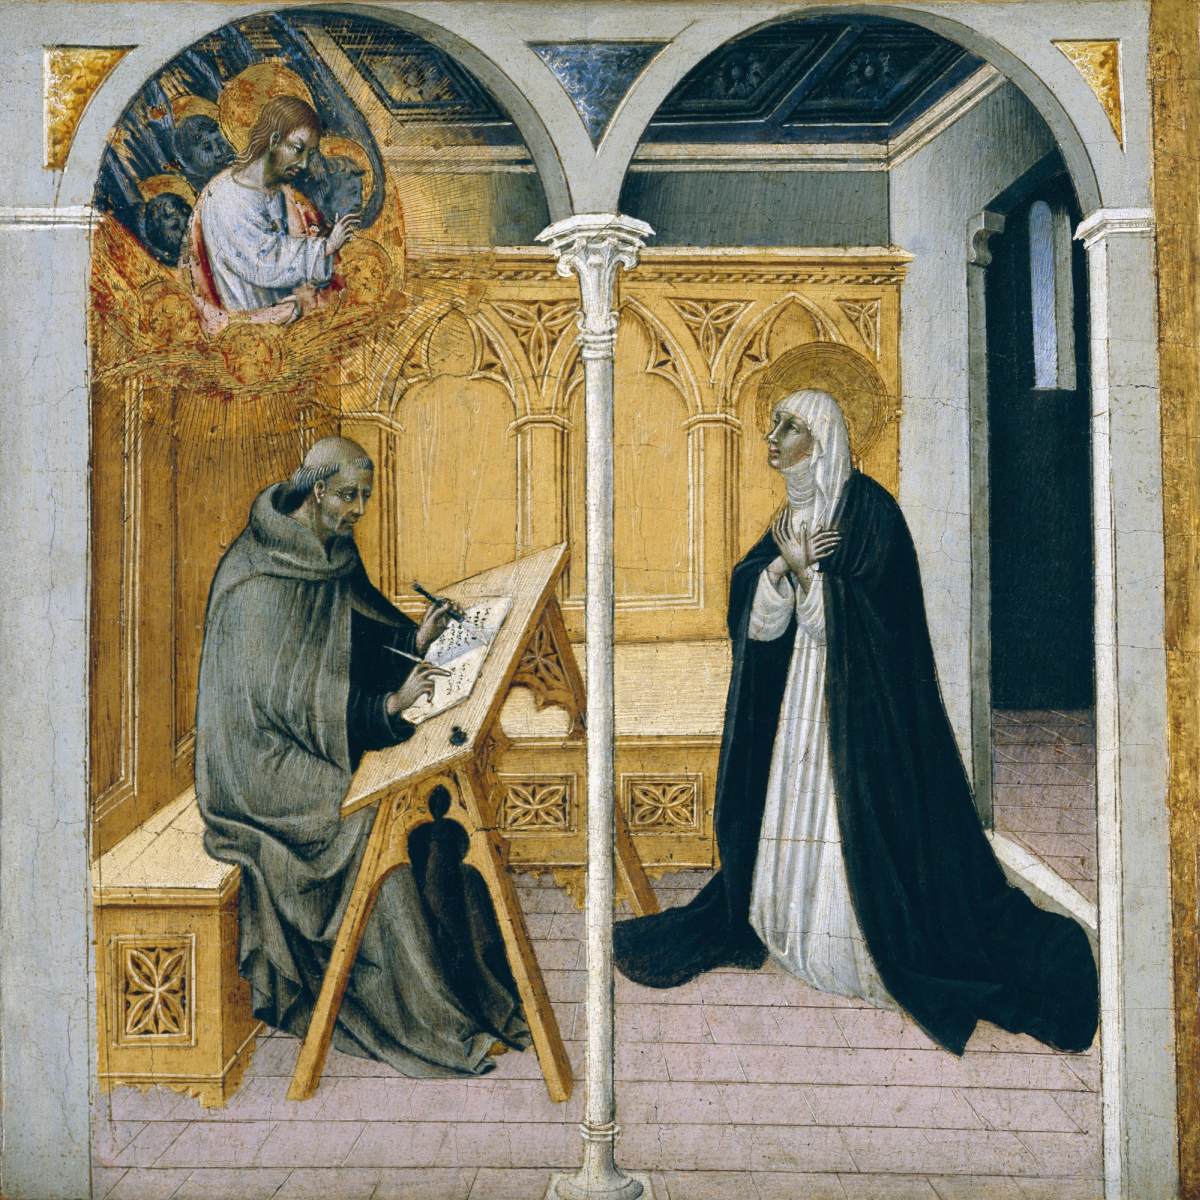 Saint Catherine of Siena Dictating Her Dialogues